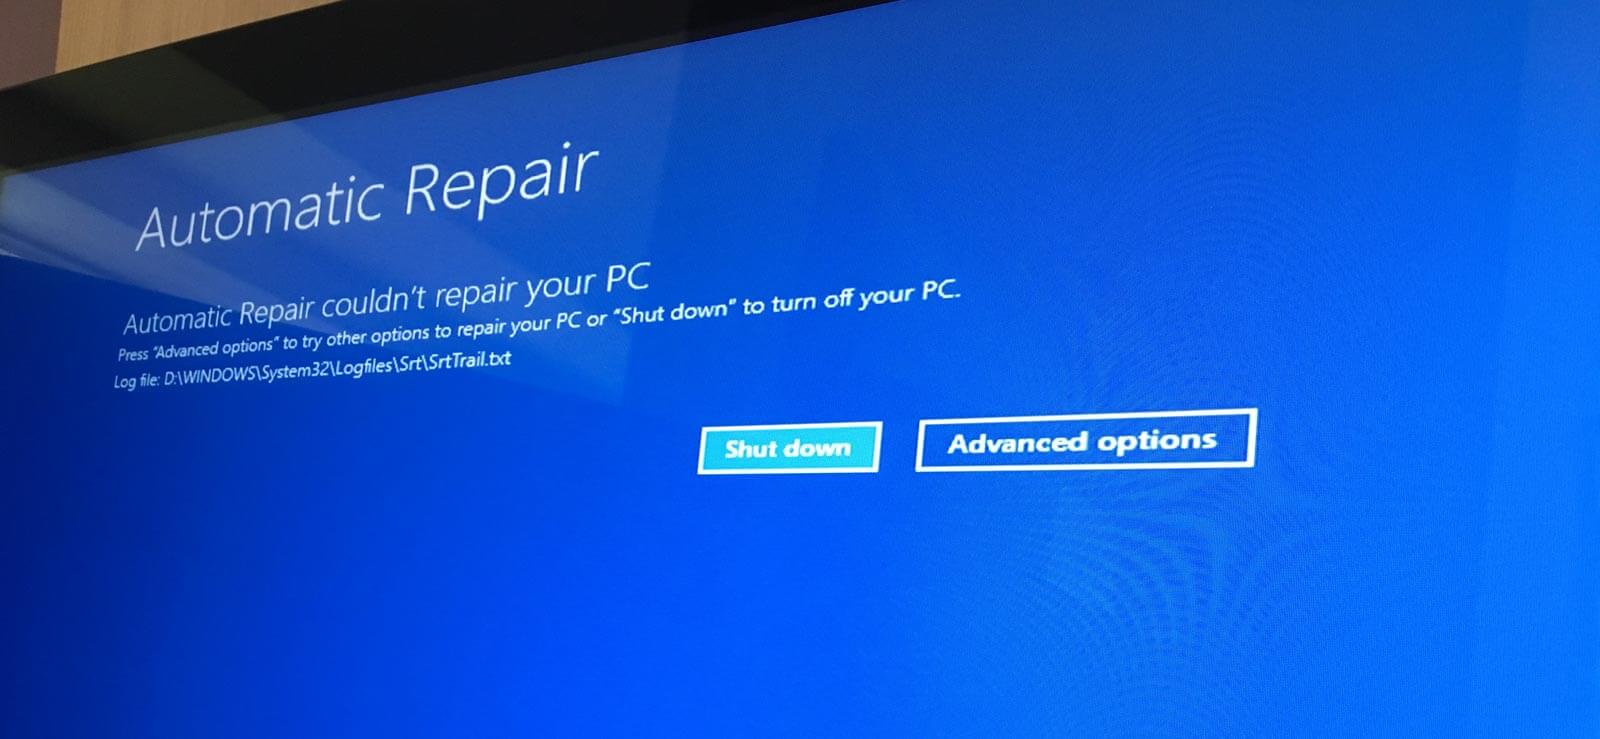 Endless loop: Your laptop gets stuck in the automatic repair loop, where it automatically restarts and attempts to fix the problem without success.
Error messages: You see error messages such as "Automatic Repair couldn't repair your PC" or "Your PC did not start correctly."